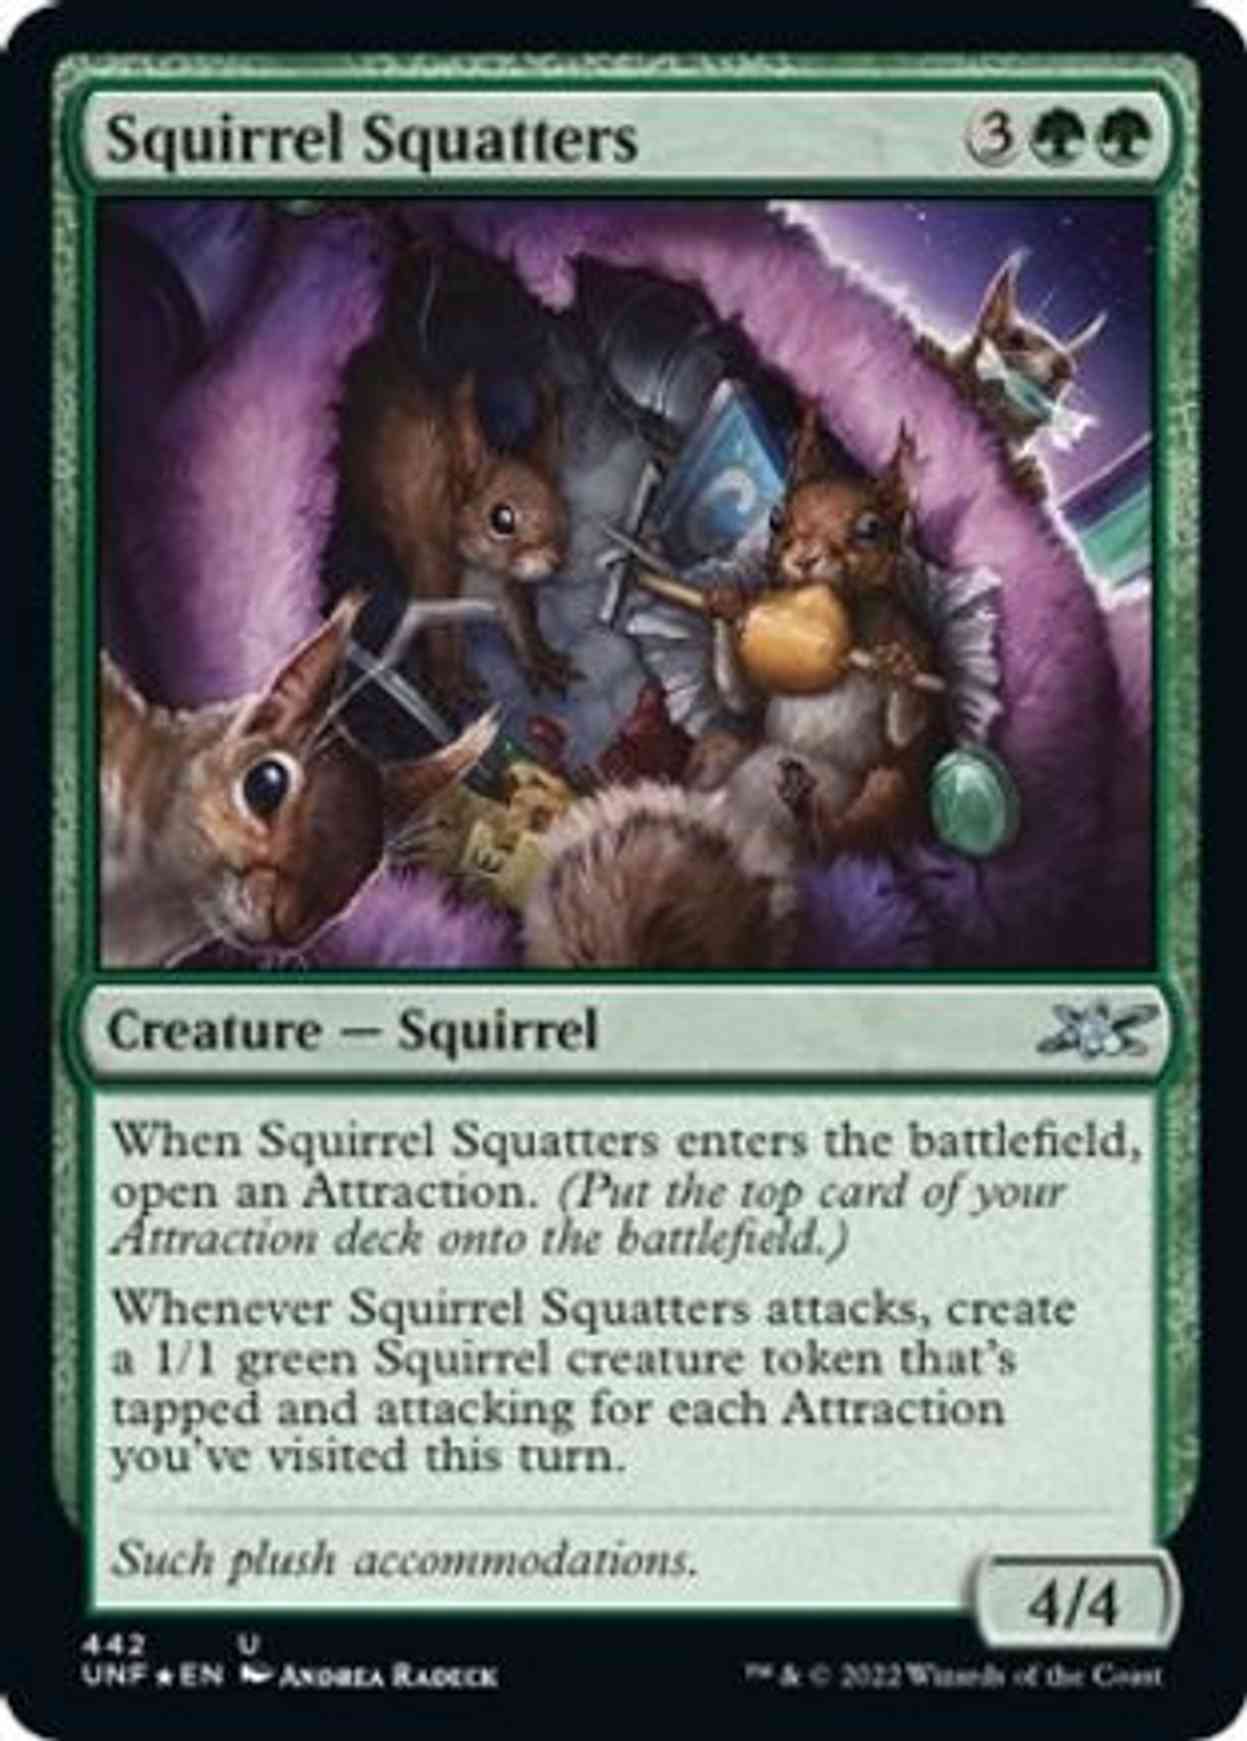 Squirrel Squatters (Galaxy Foil) magic card front